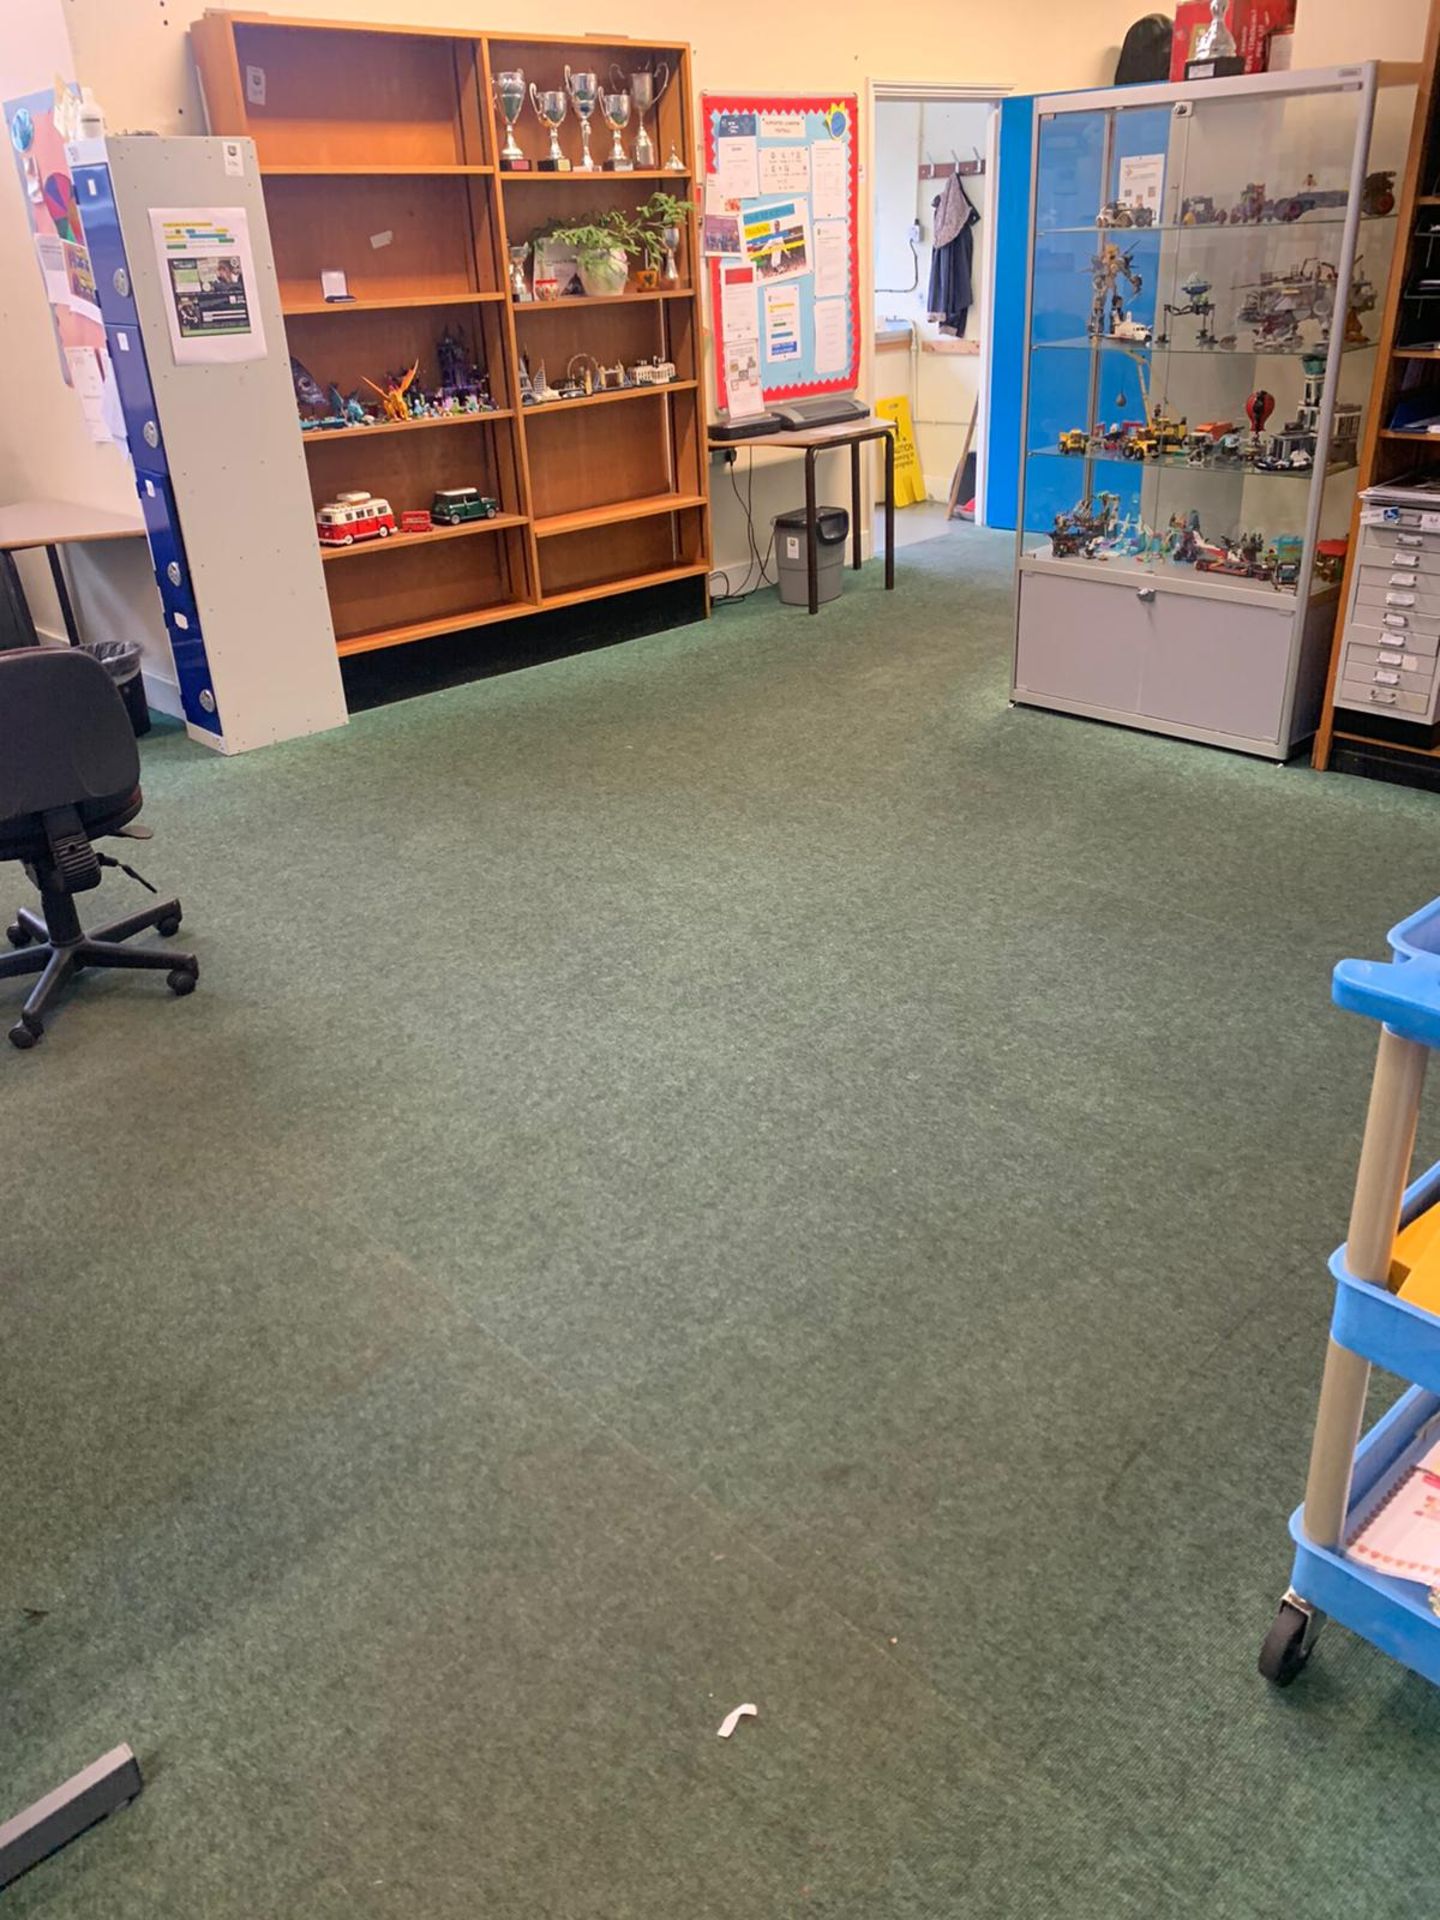 Large Room of Carpet Tiles - Image 4 of 6